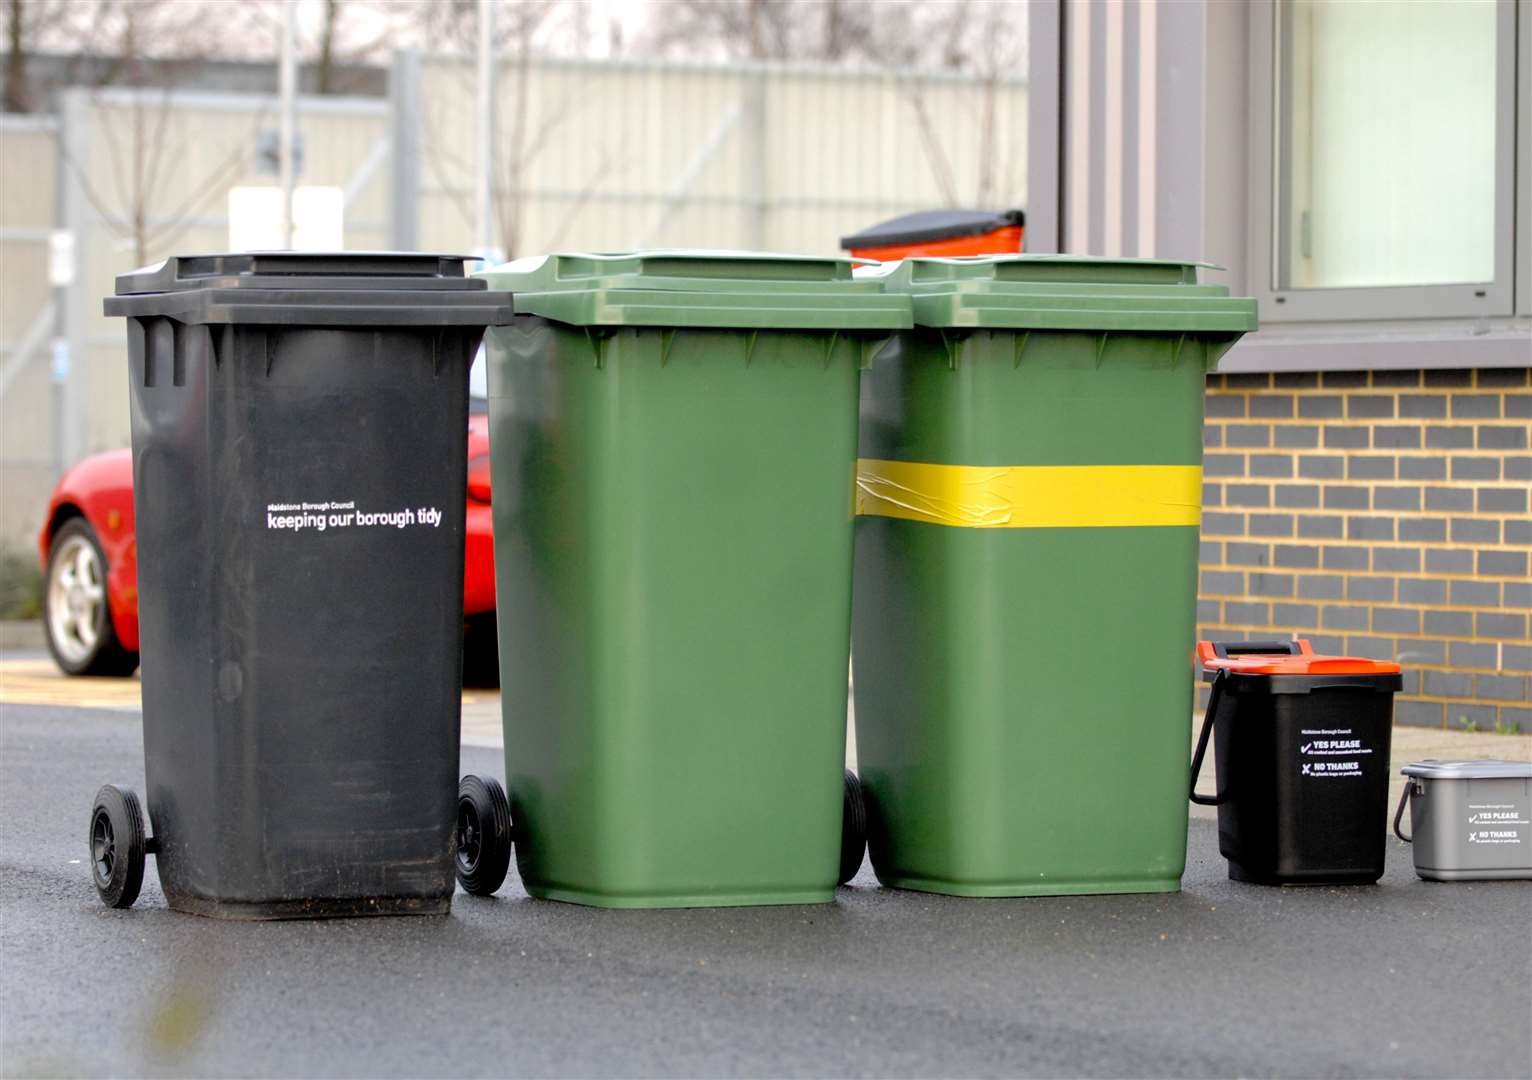 Waste bins: Who should be responsible for paying for new ones?